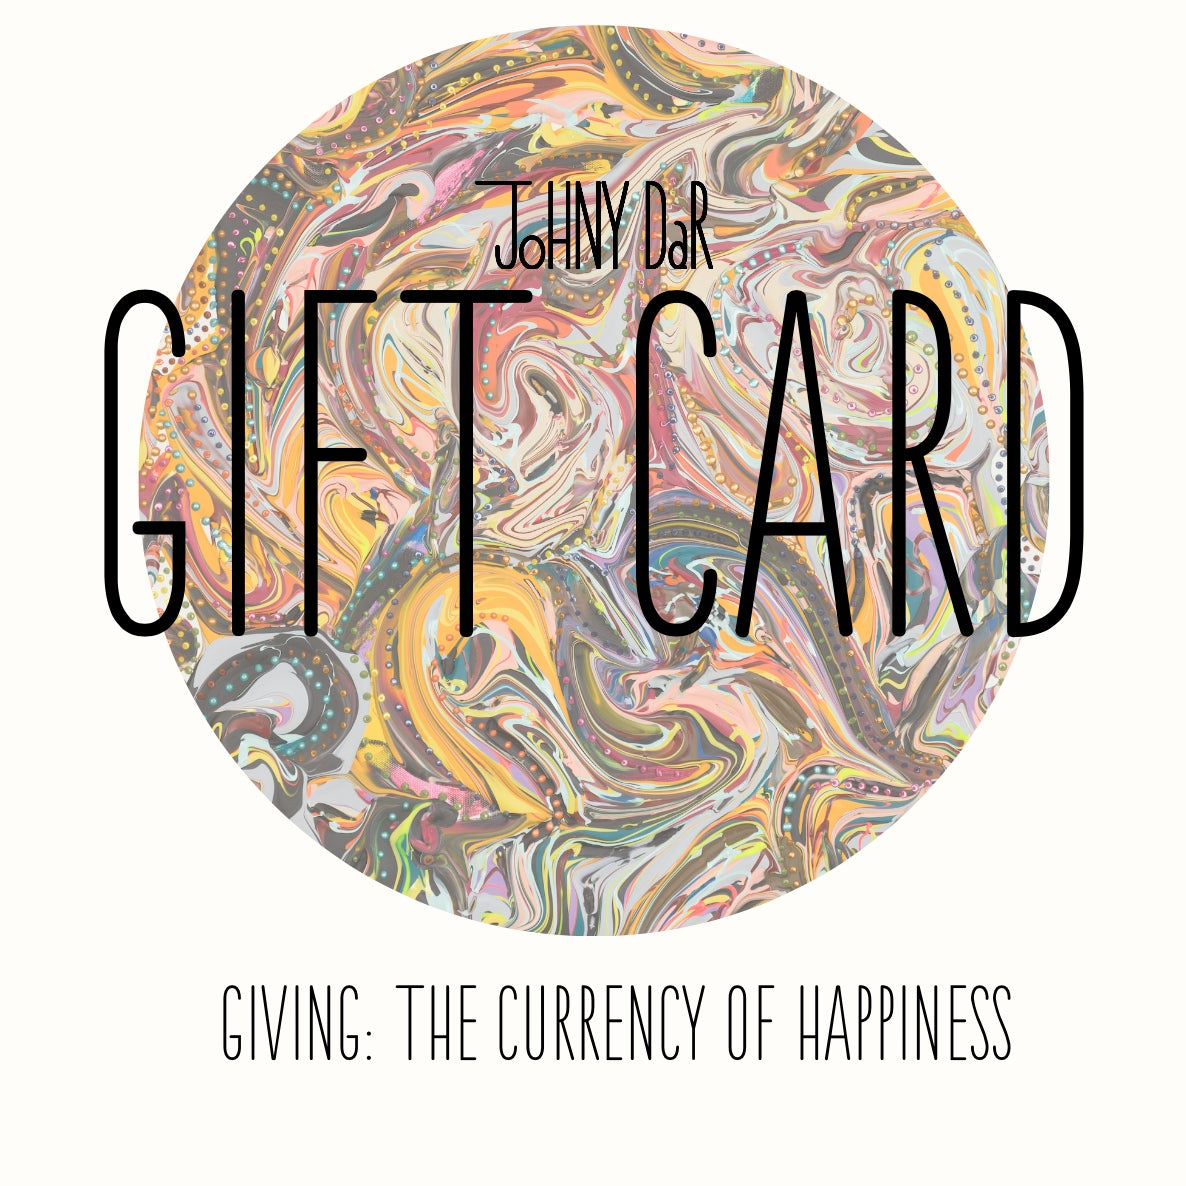 Johny Dar Gift Card // Giving: The Currency of Happiness